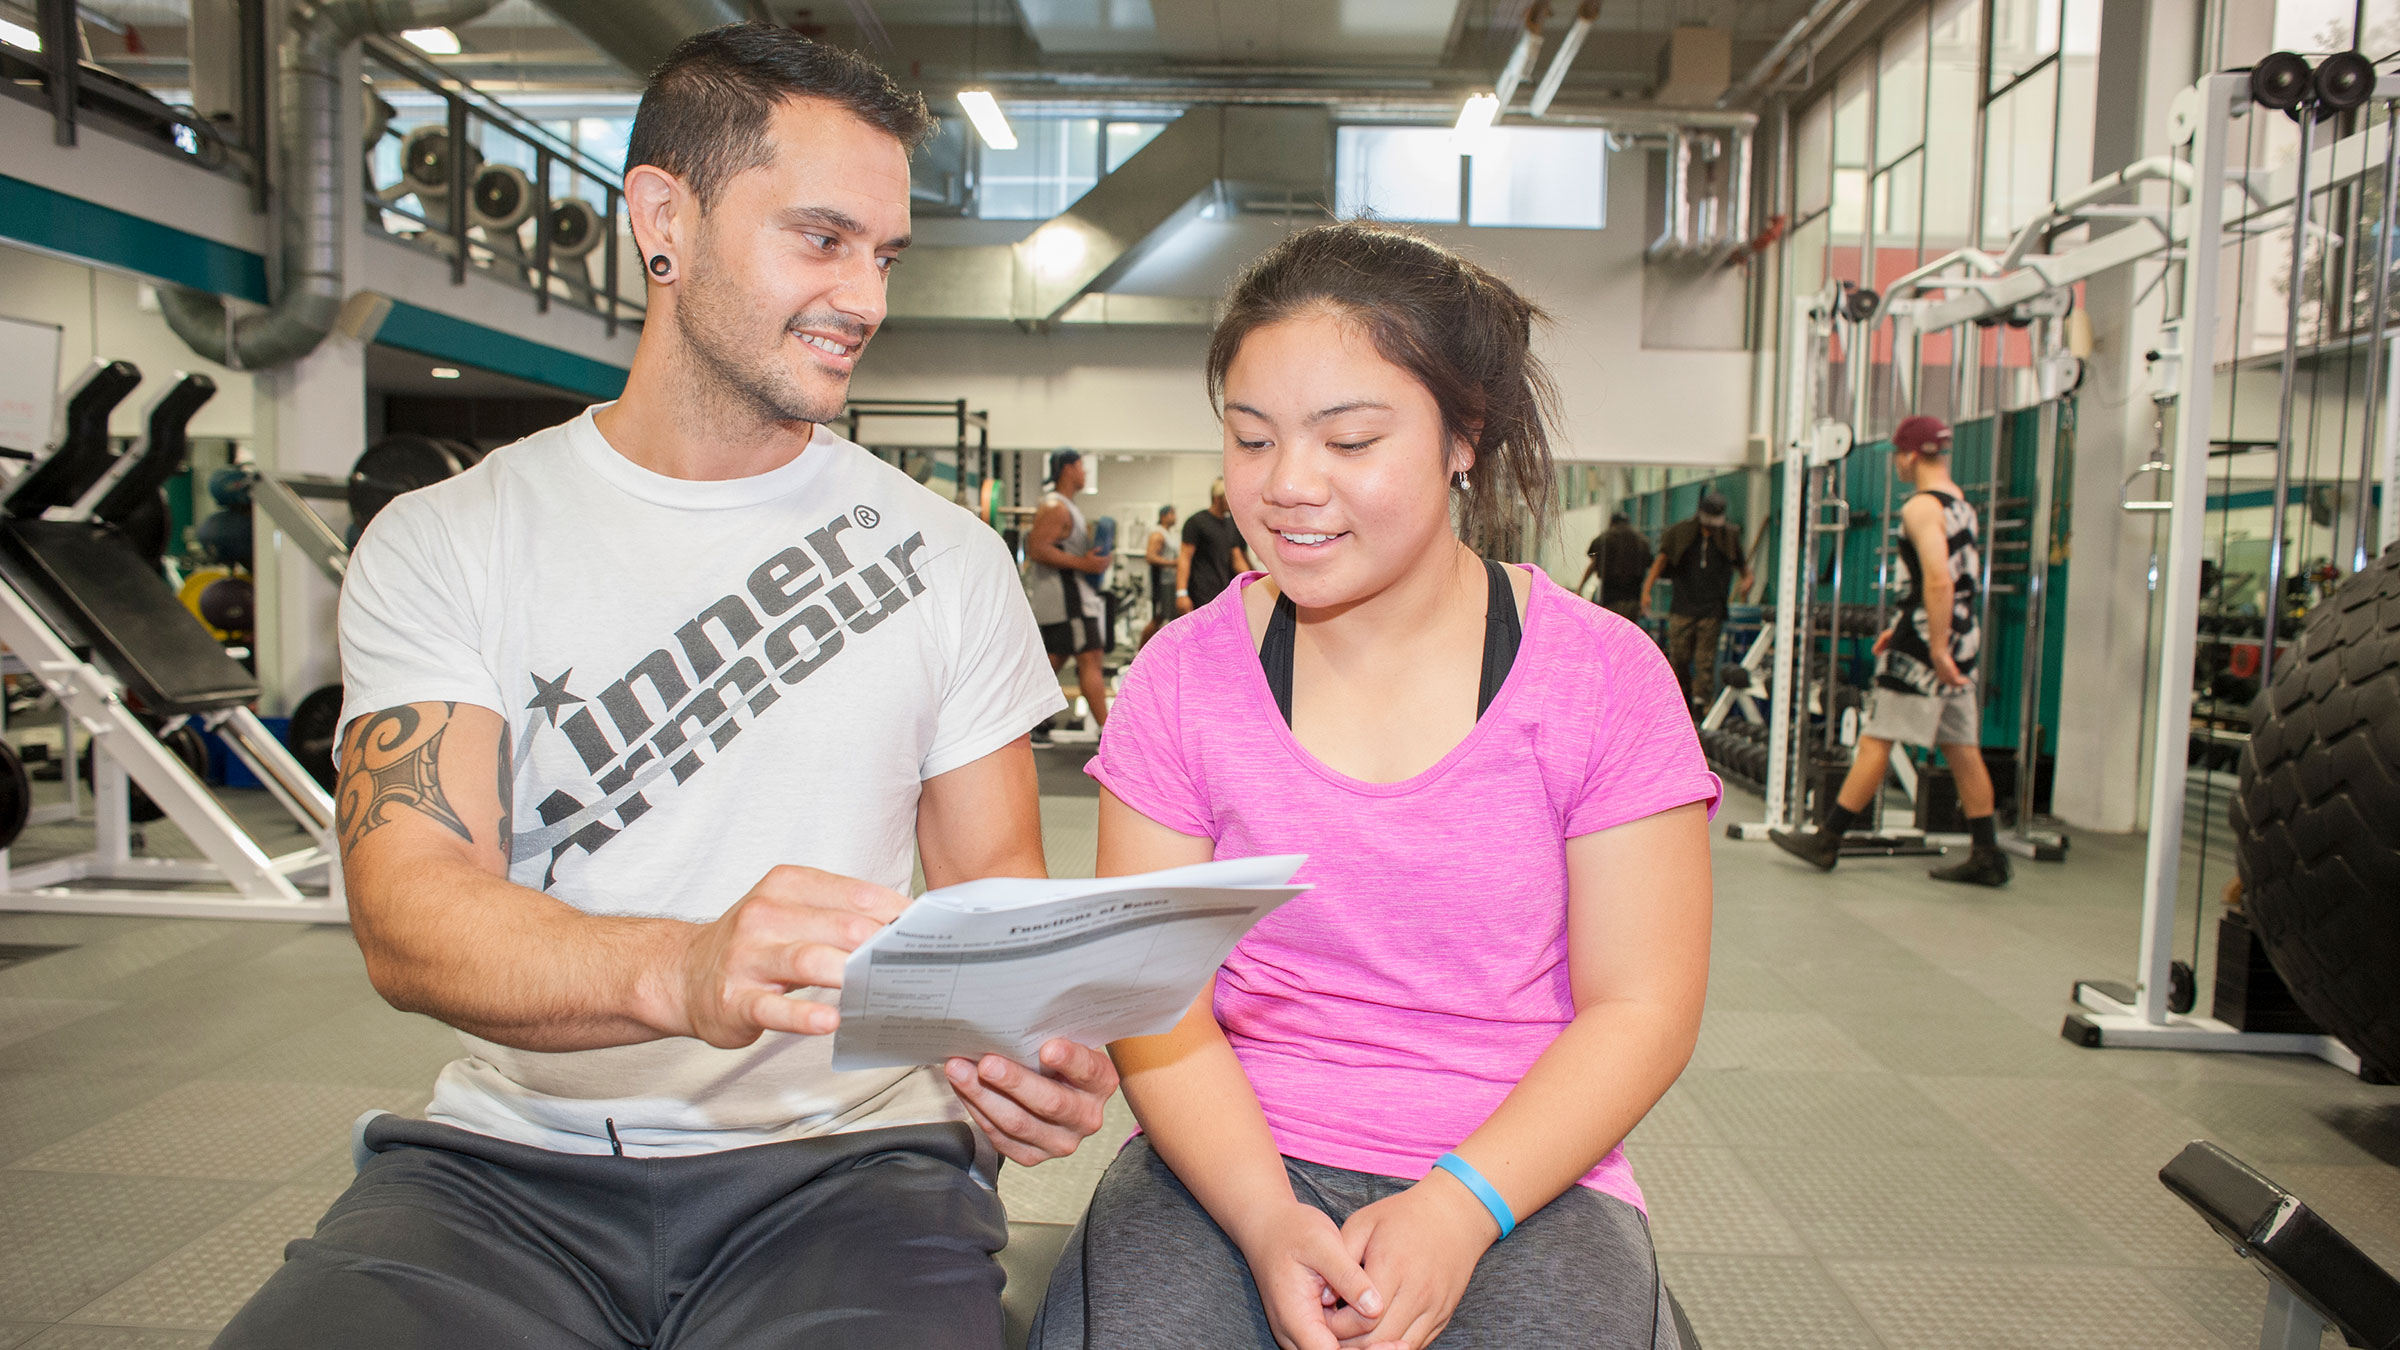 A teacher and student in a gym, discussing a worksheet